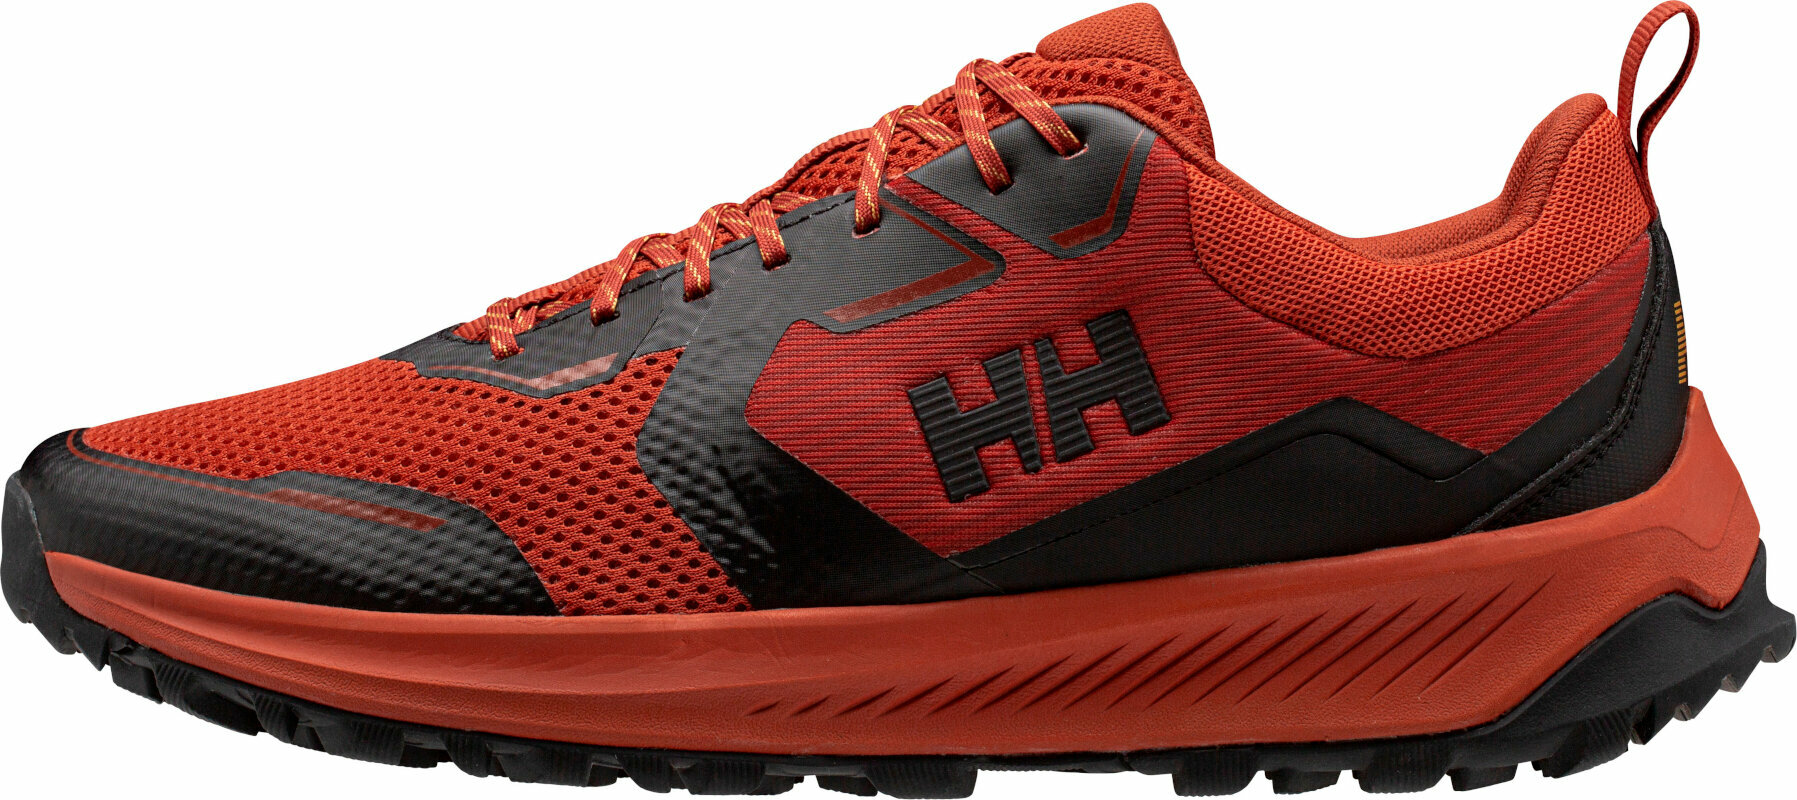 Chaussures outdoor hommes Helly Hansen Men's Gobi 2 Hiking Shoes  Canyon/Ebony 41 Chaussures outdoor hommes